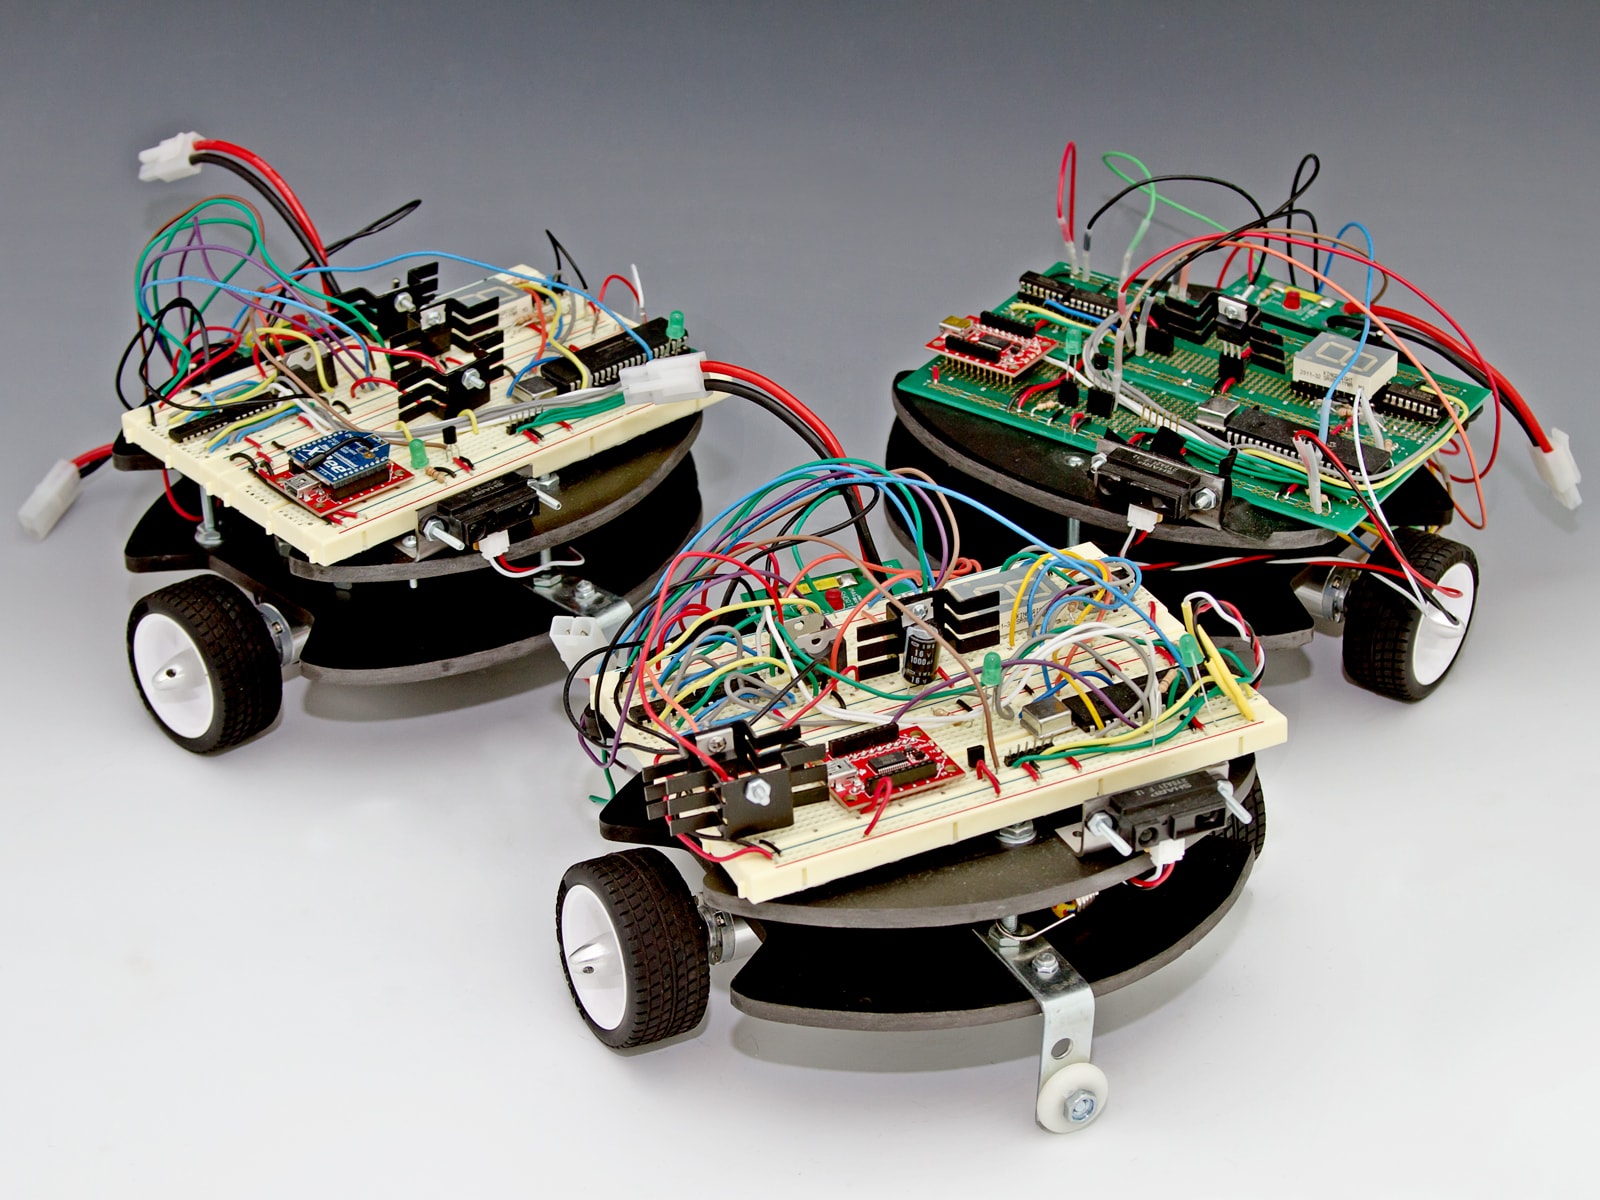 Three square robots with rounded fronts, black and white wheels and exposed circuitry.